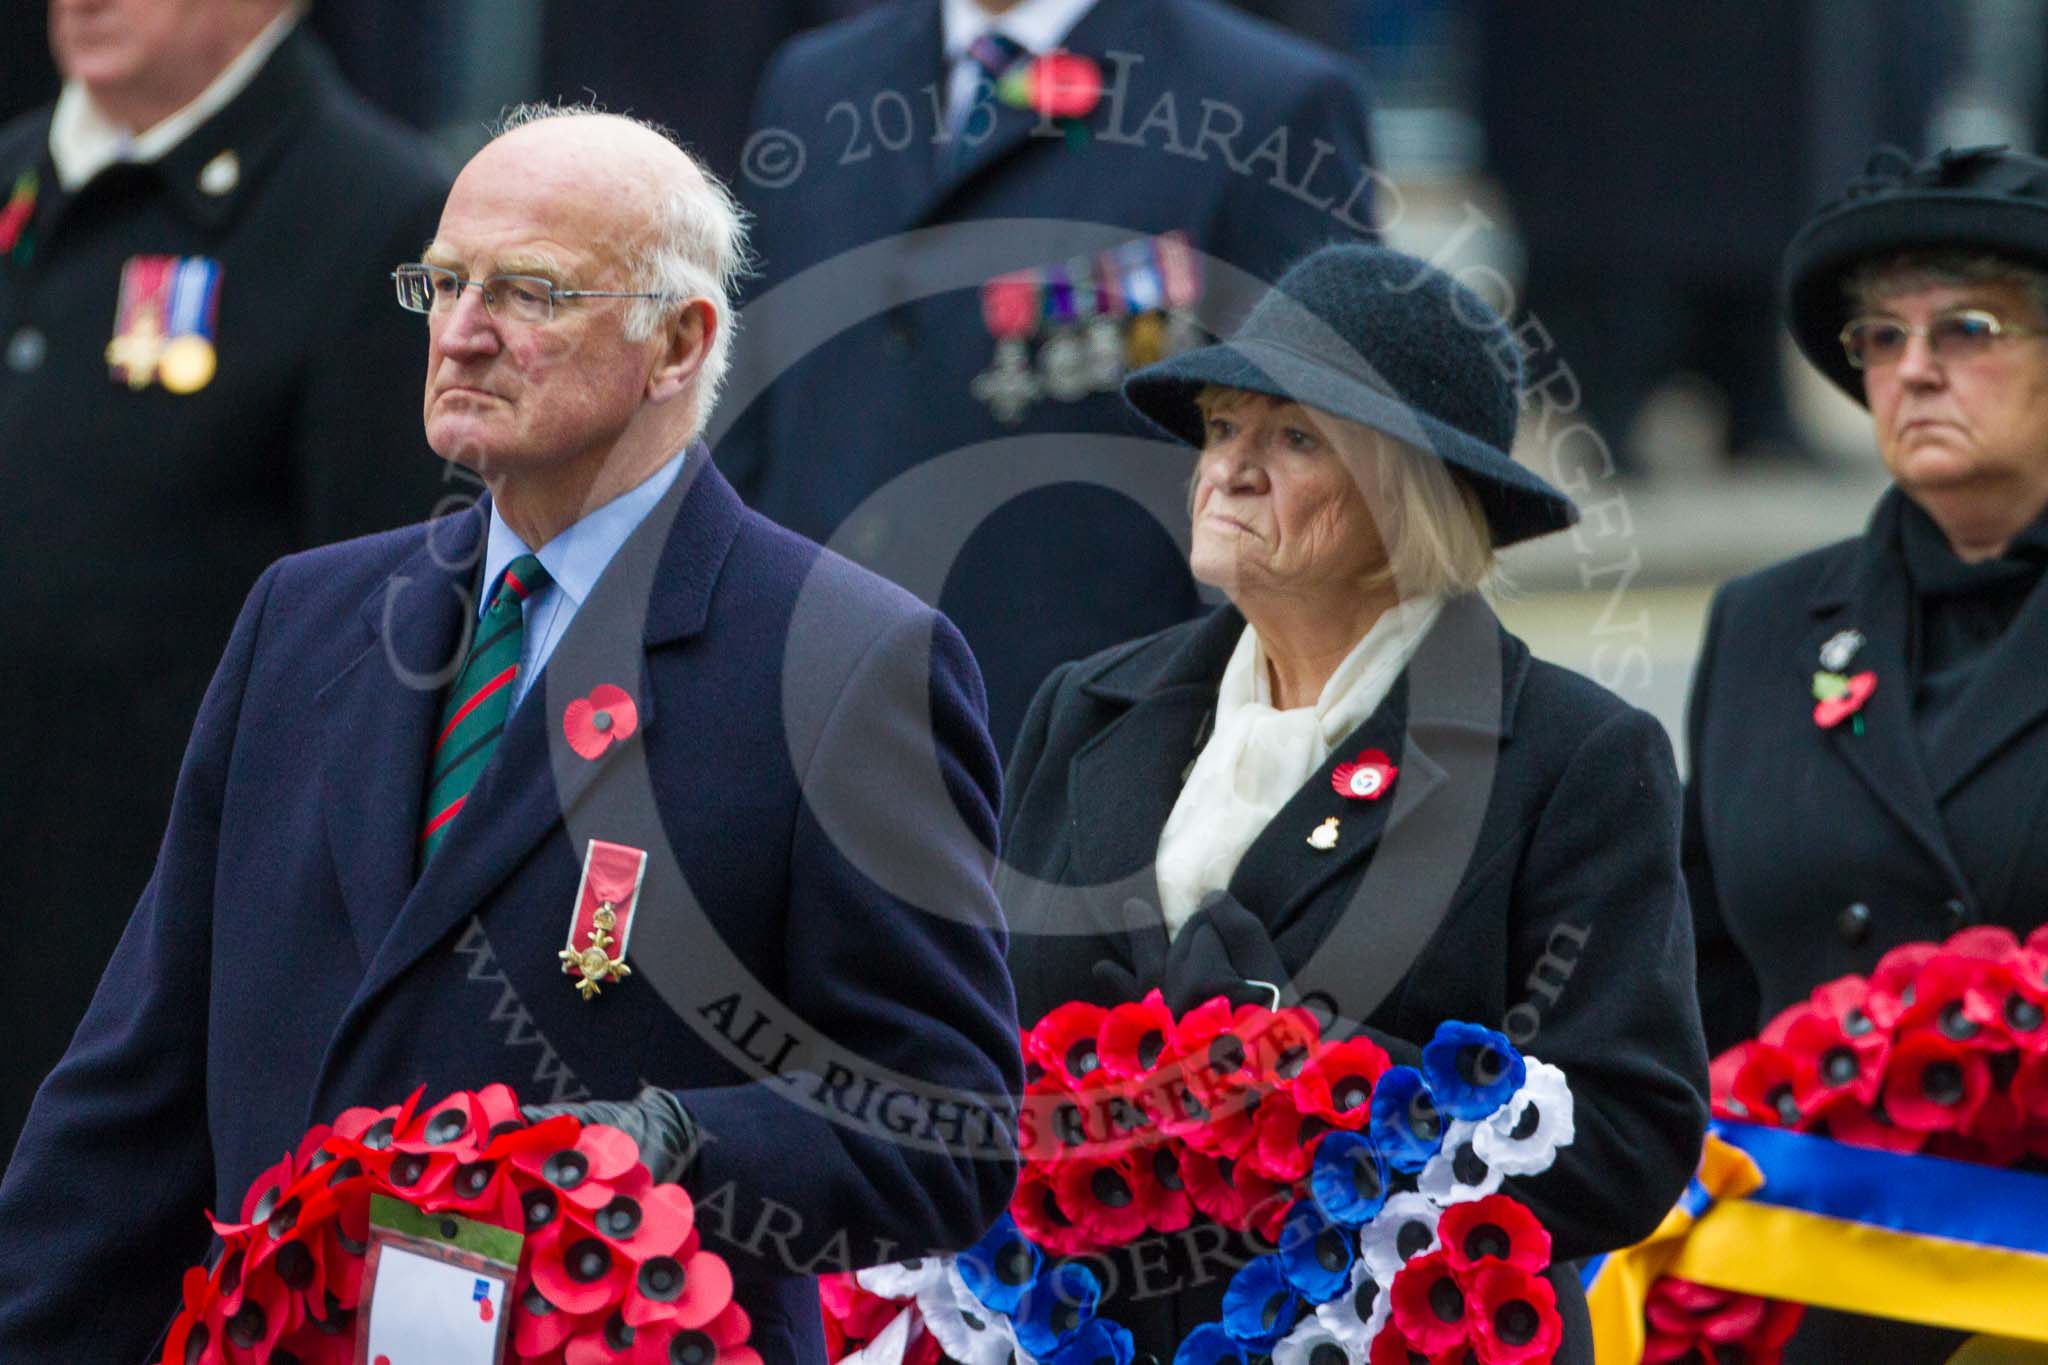 Remembrance Sunday at the Cenotaph 2015: On the way to the Cenotaph to lay their wreaths: Patrick Mitford-Slade for the Royal Commonwealth Ex-Services League, Jan Harvey for Royal British Legion Scotland and Marilyn Humphry for the Royal British Legion Women’s Section. Image #341, 08 November 2015 11:25 Whitehall, London, UK